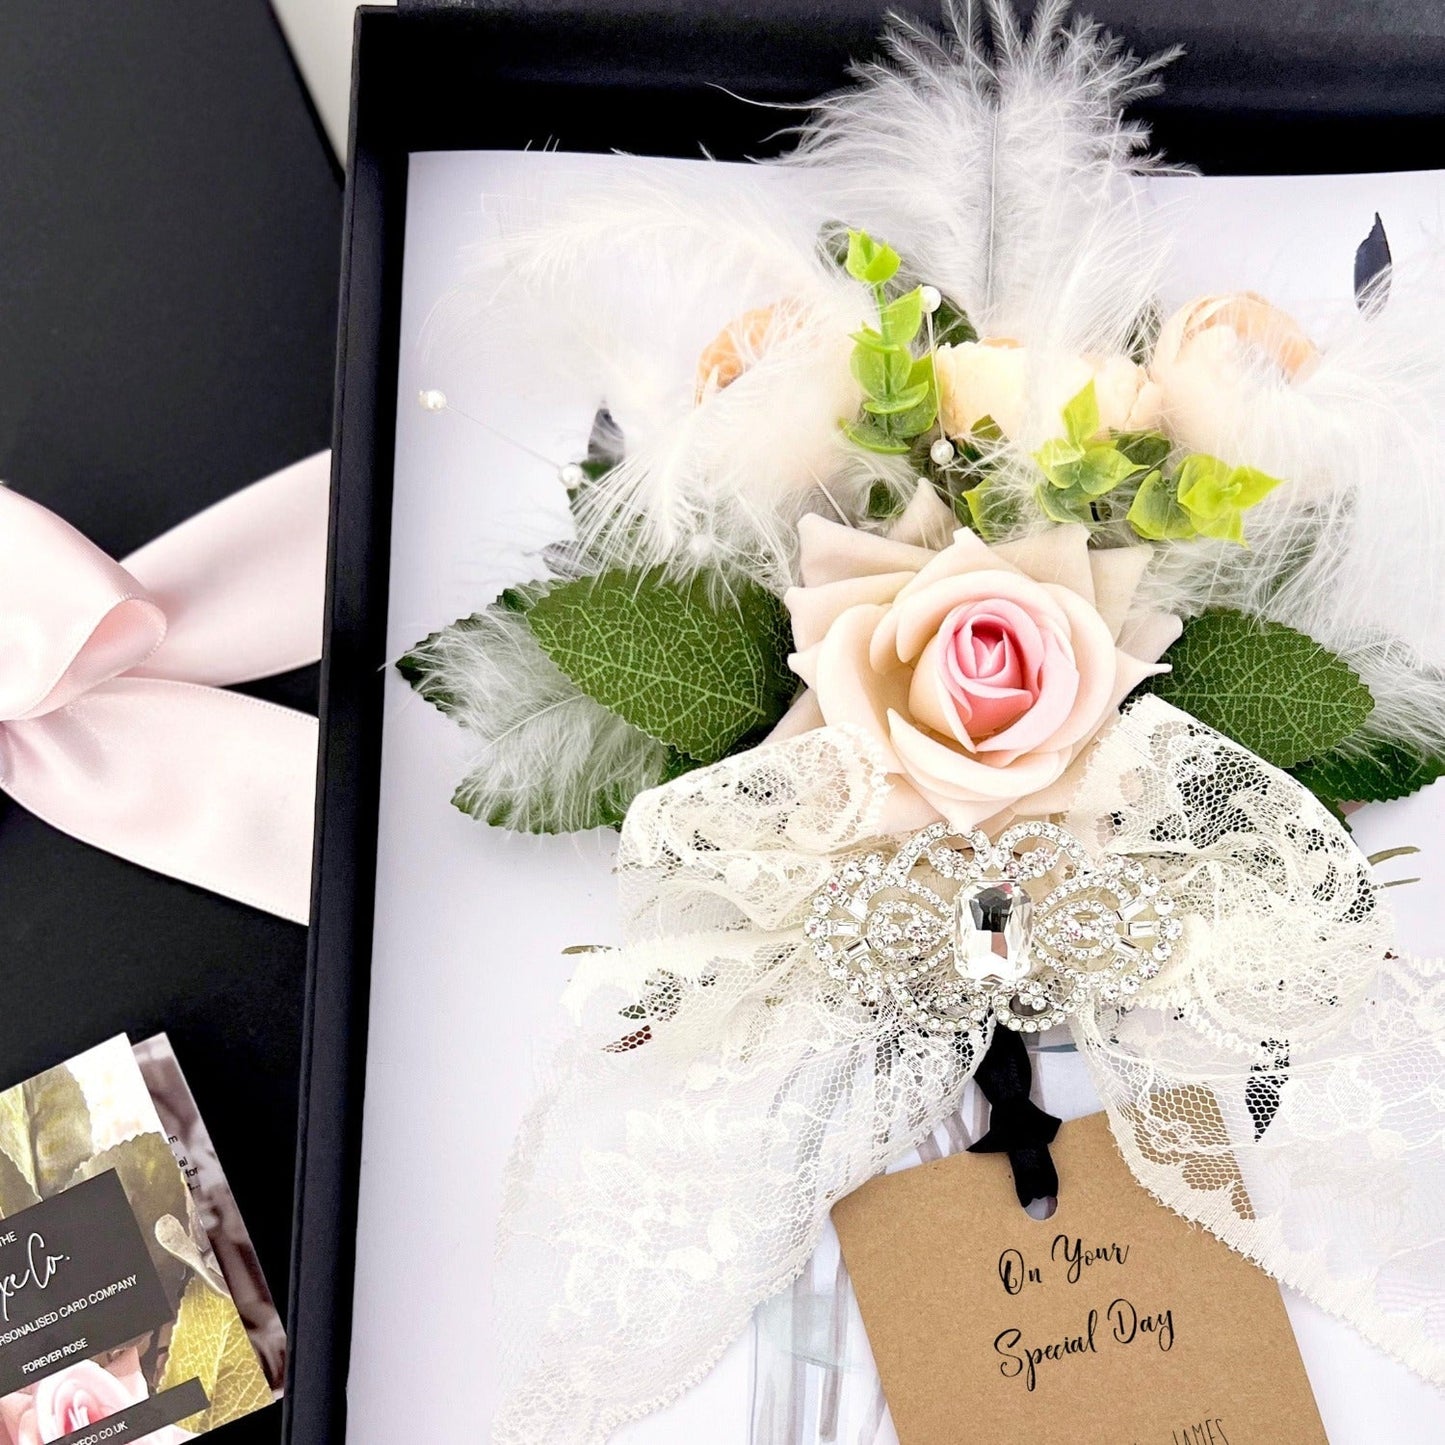 Luxurious 60th Diamond anniversary gifts - with the designer edge. Feathers, sparkly crystal and roses